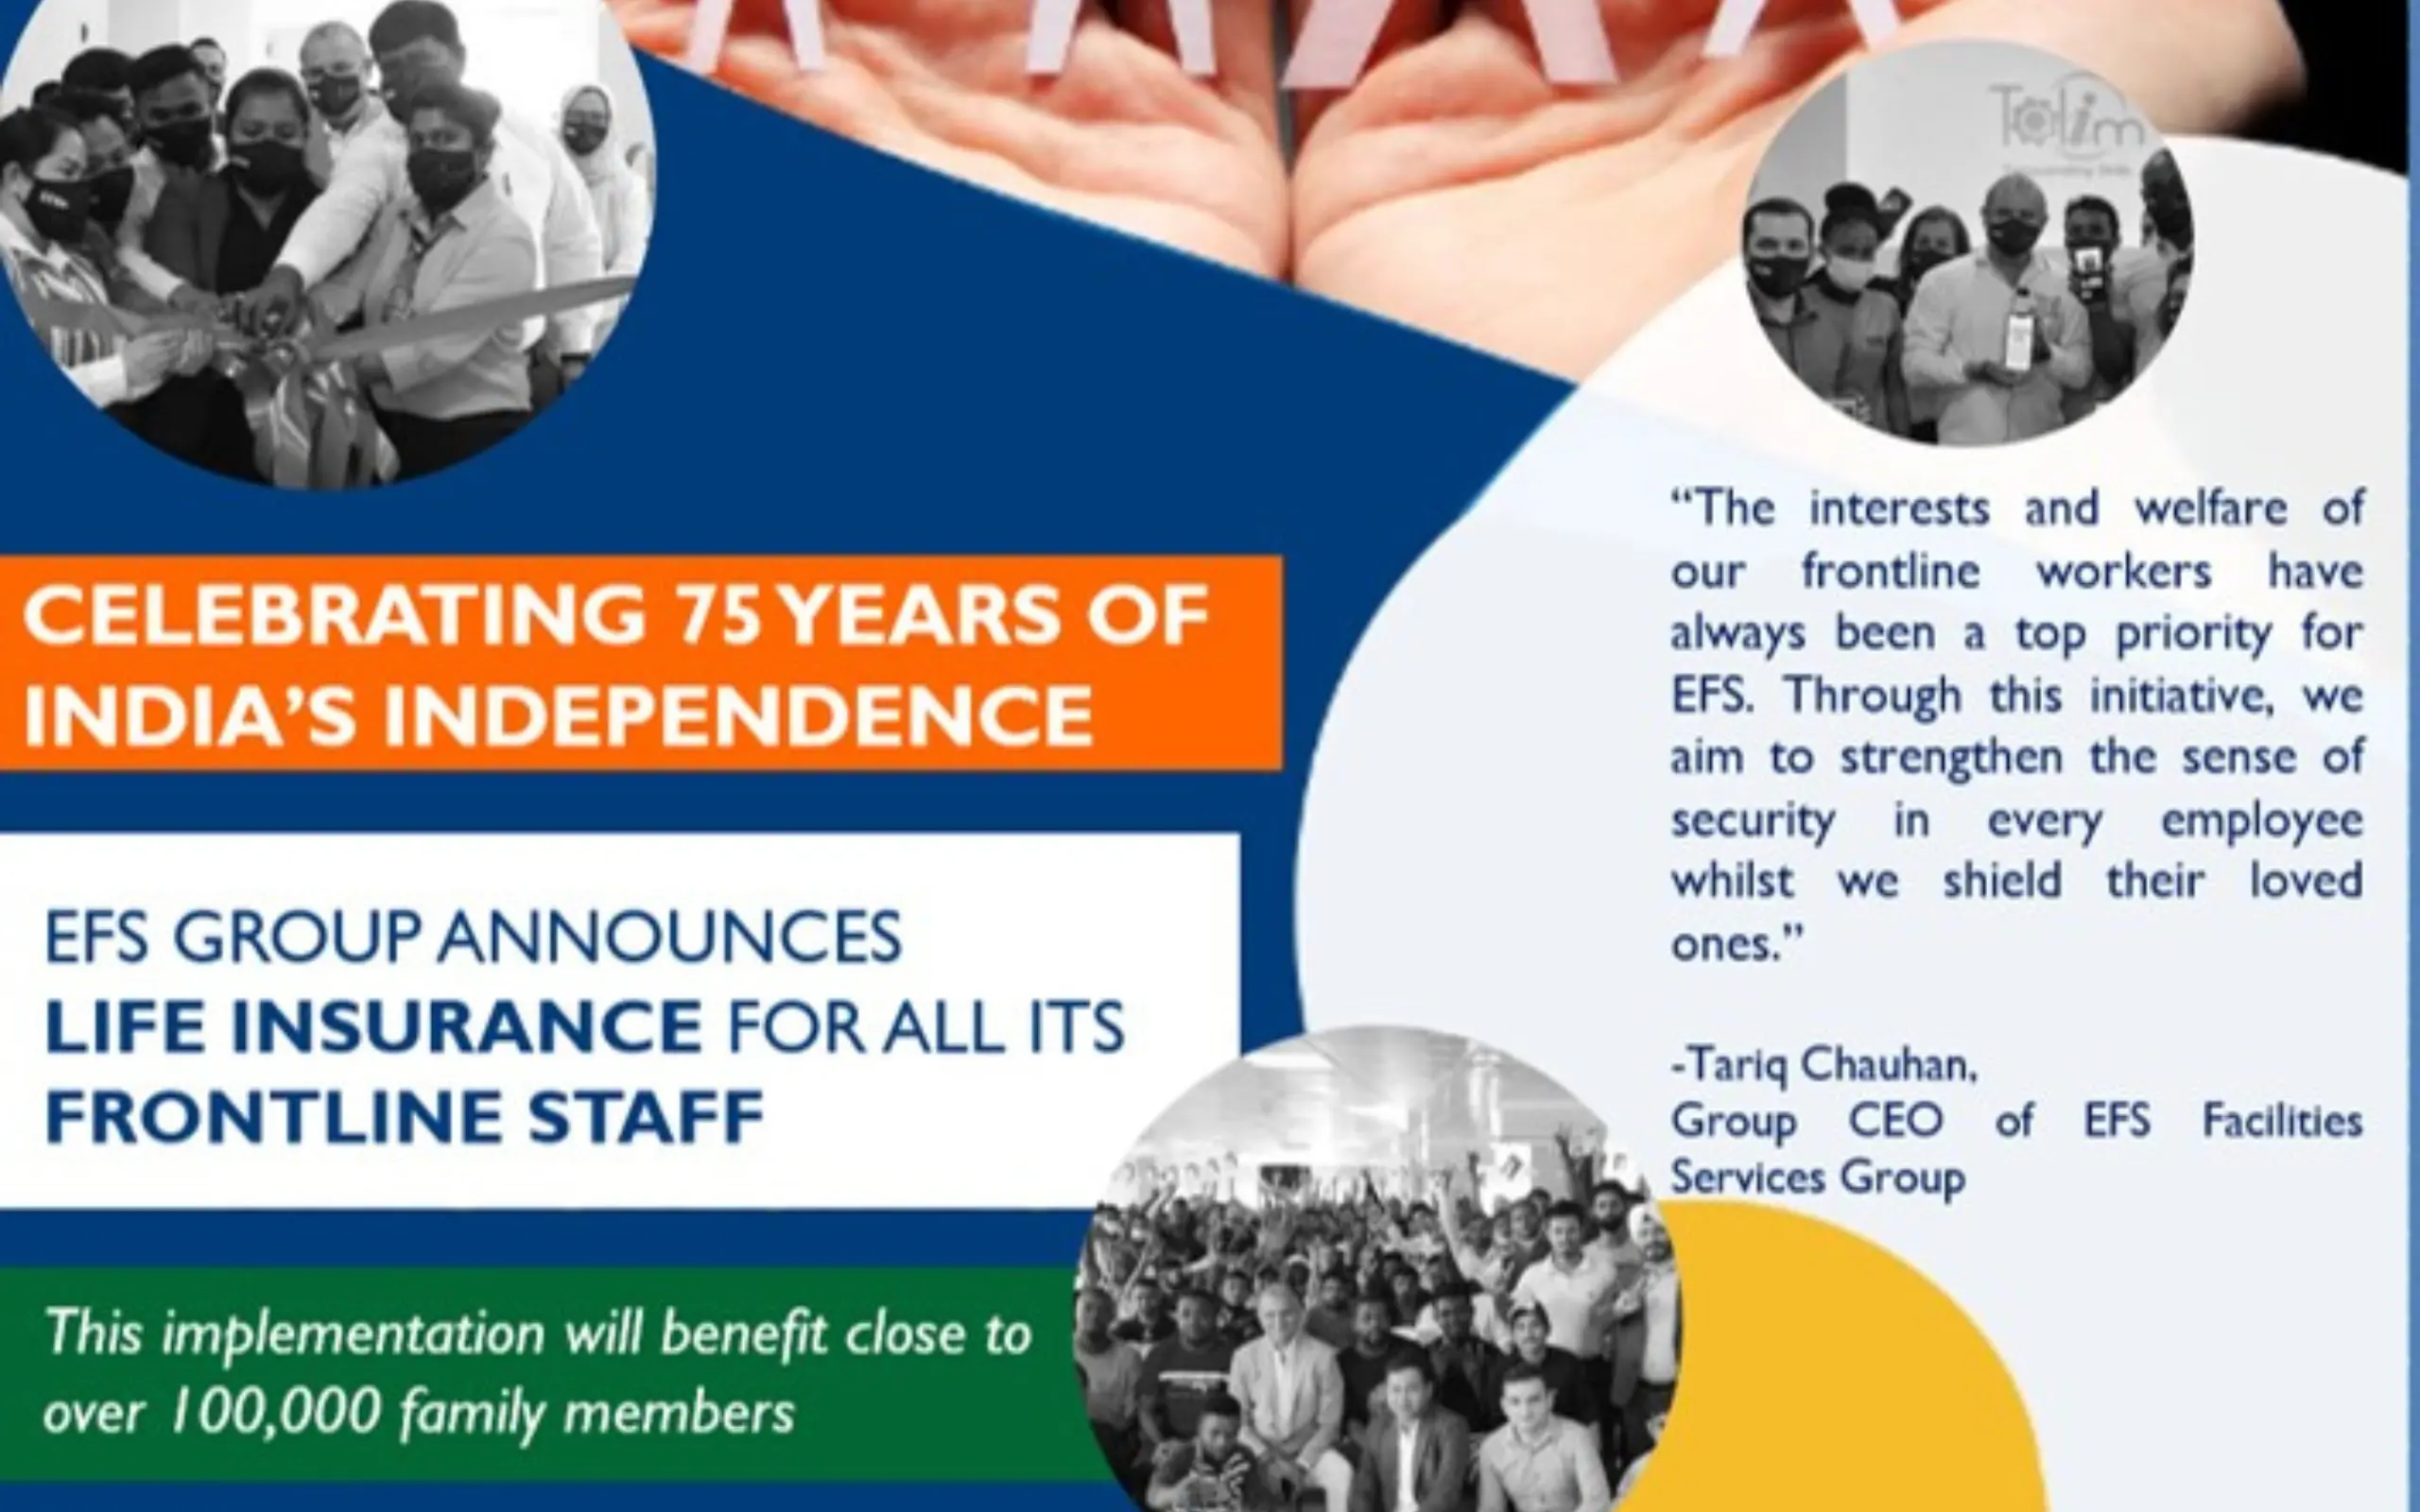 EFS-group-announced-life-insurance-for-its-housekeeping-technical-and-security-staff-from-all-nationalities